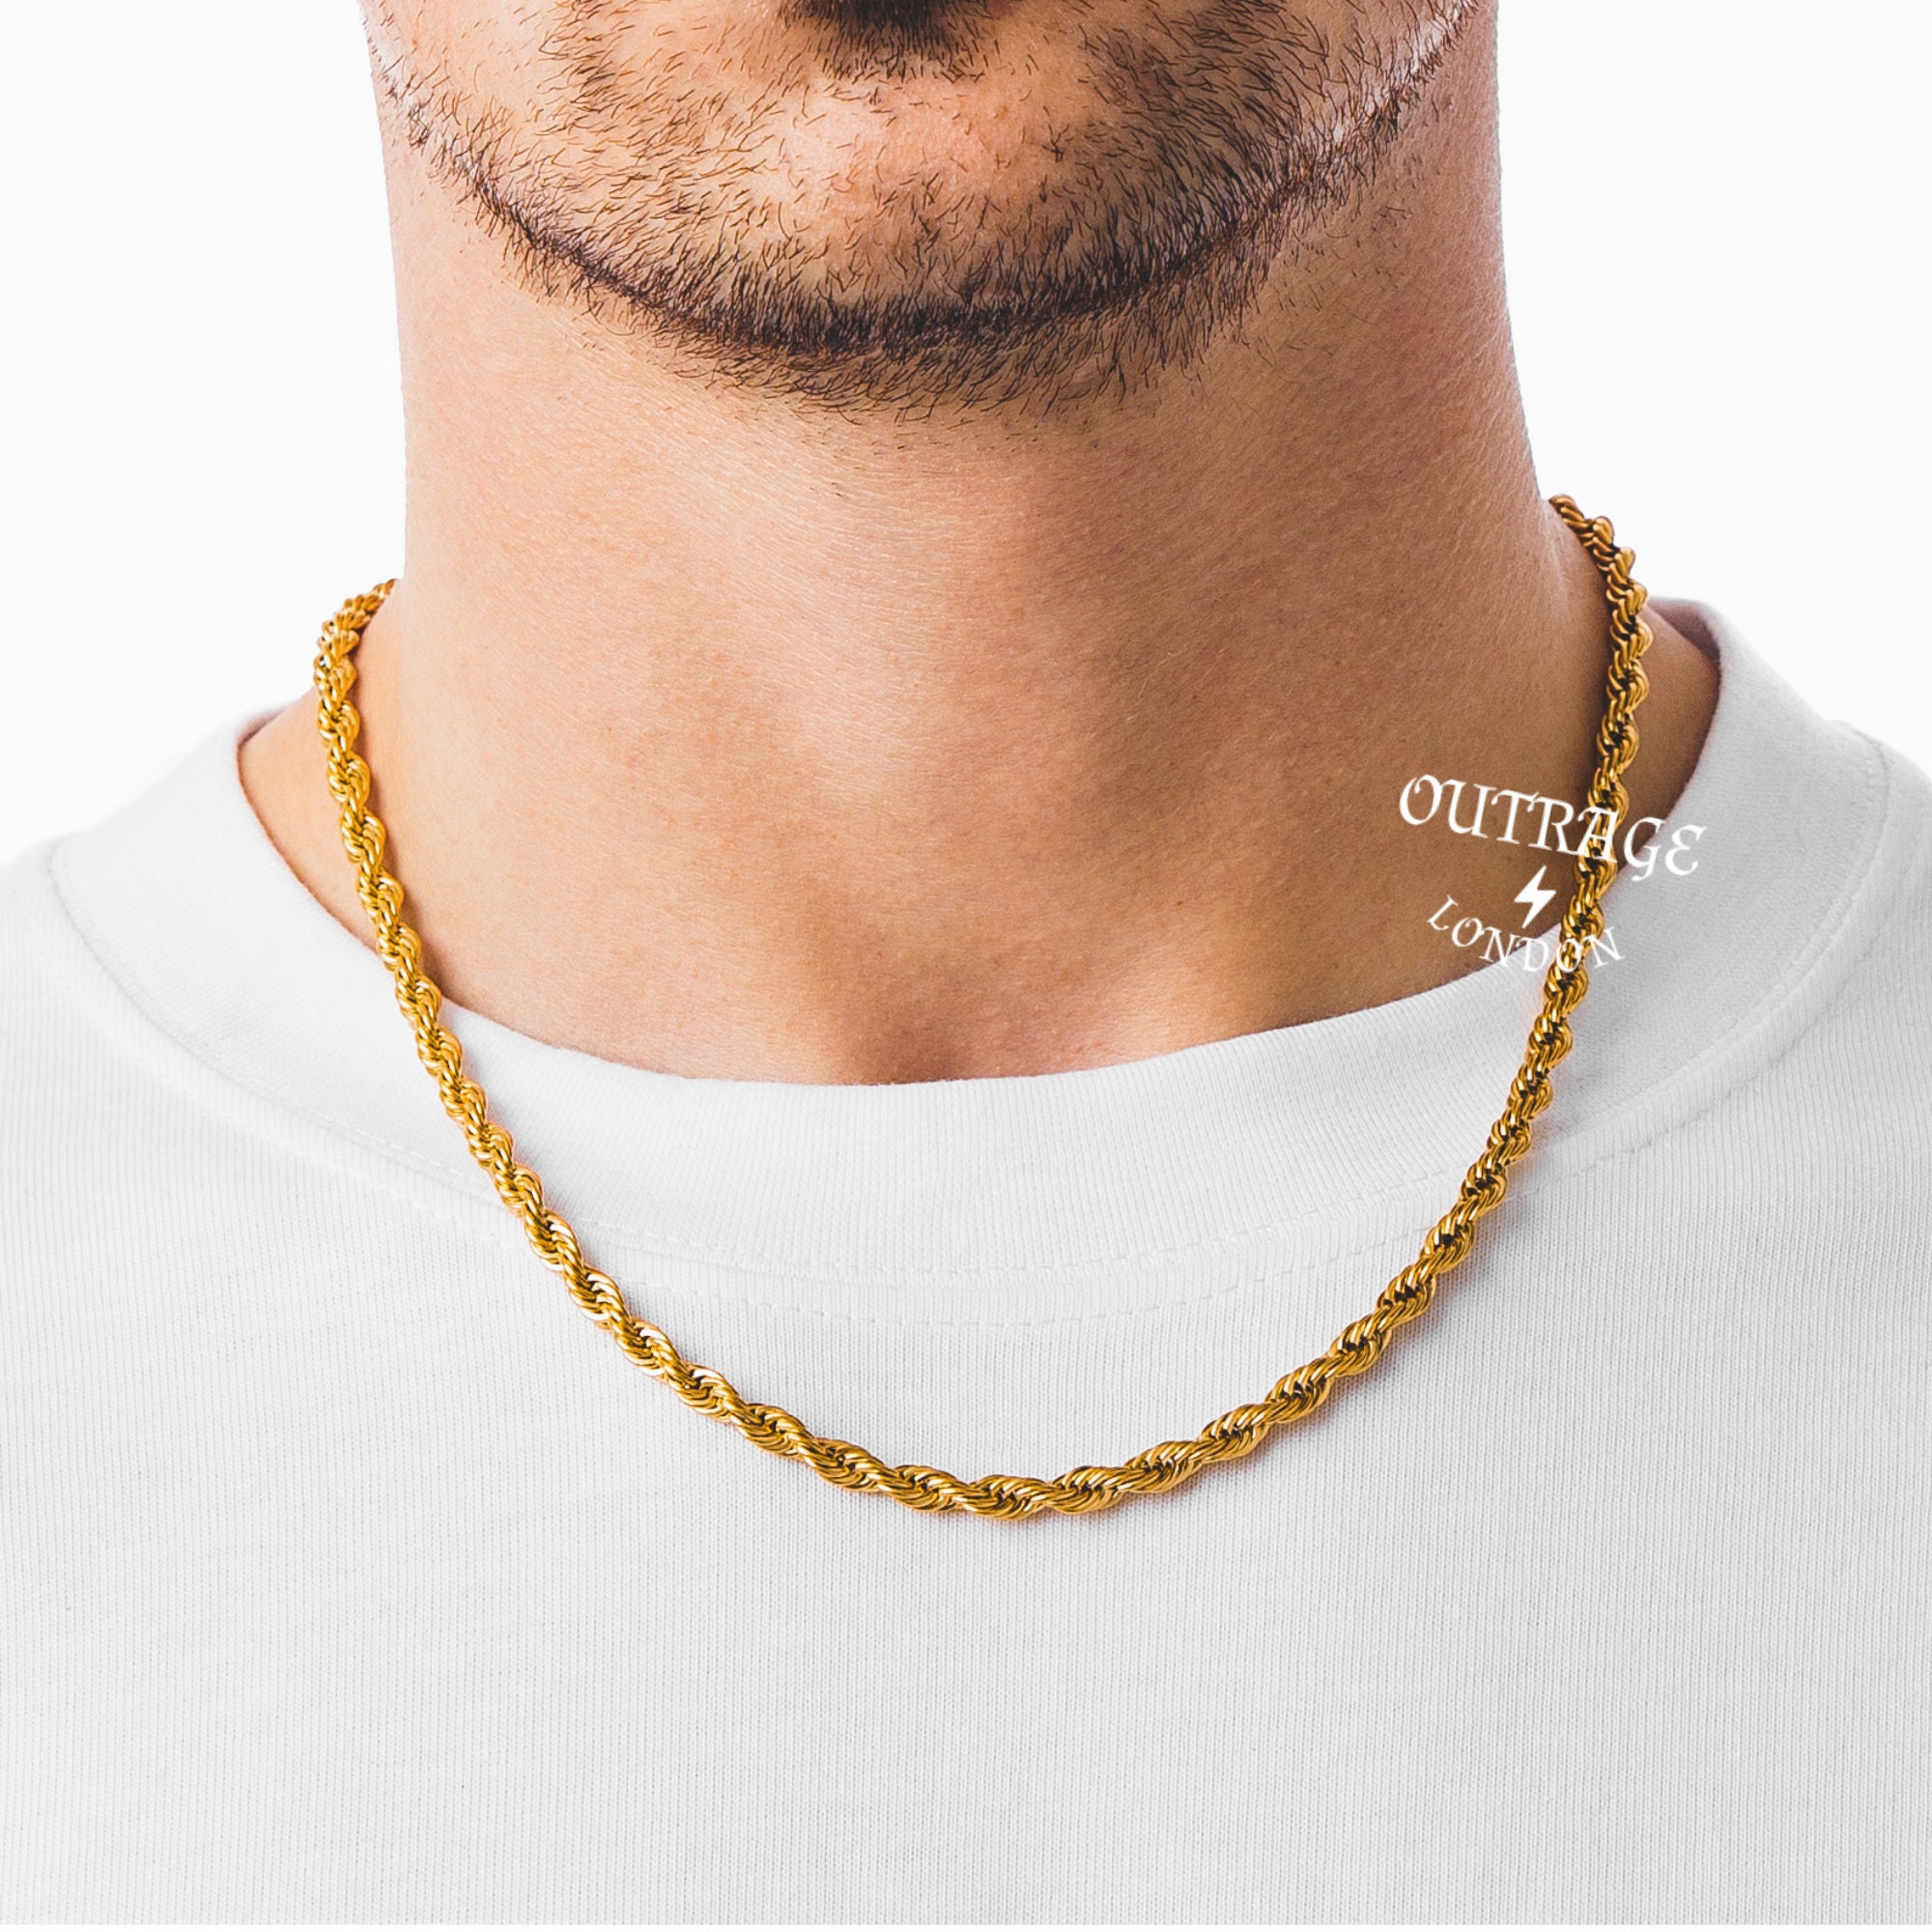 Cuoff Jewelry 3mm Stainless Steel Gold Chain Cuban Men's Necklace